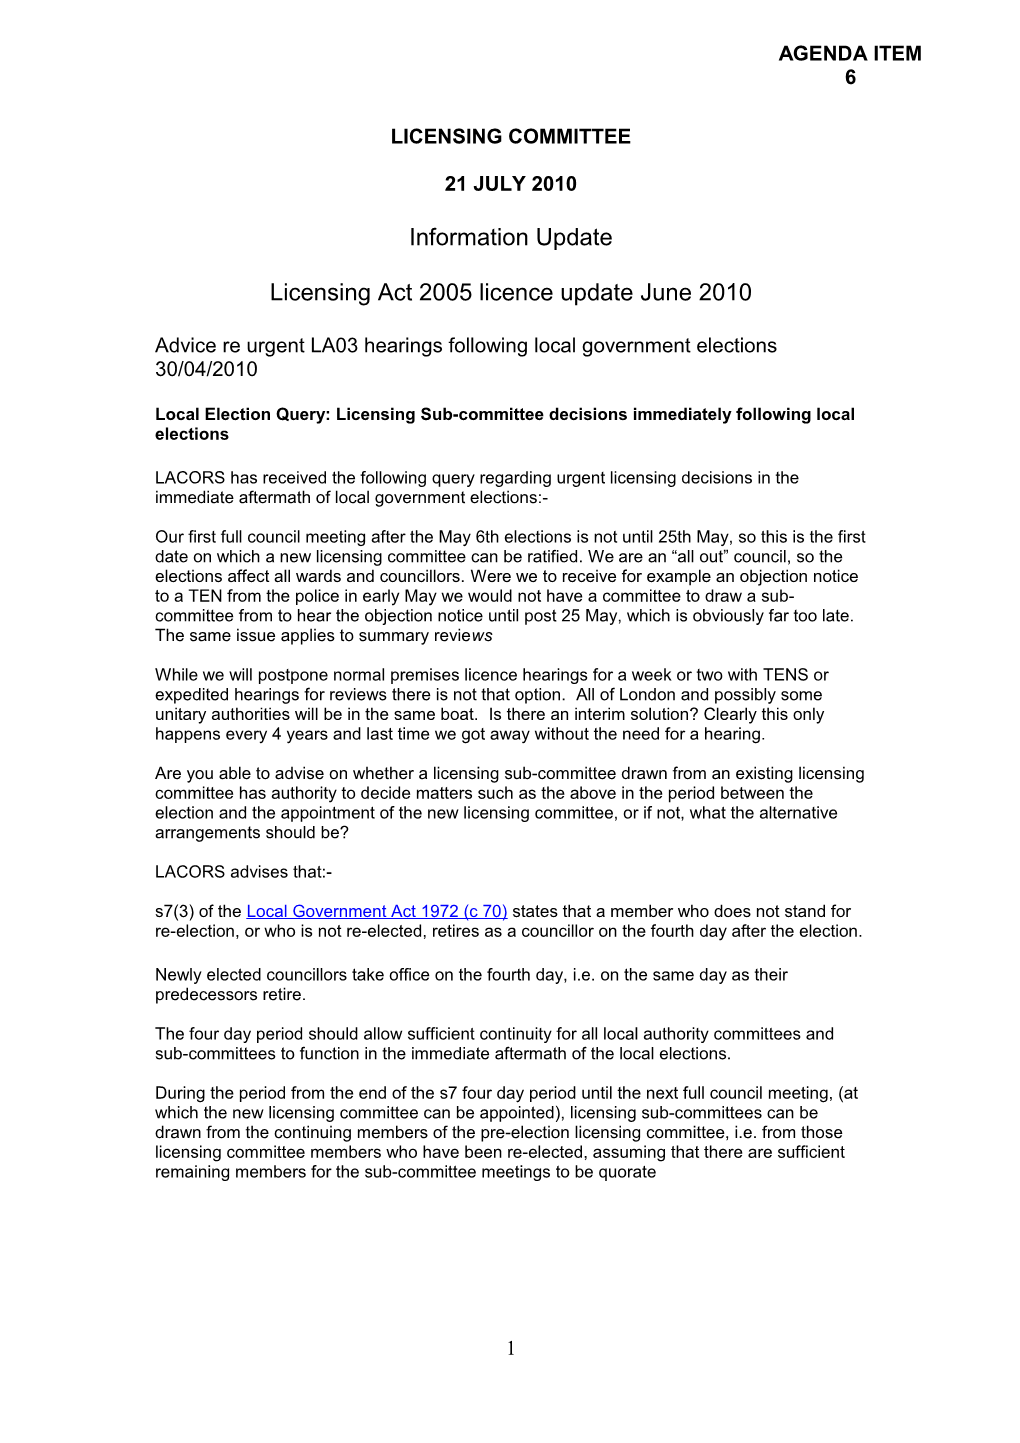 Licensing Act 2005 Licence Update June 2010